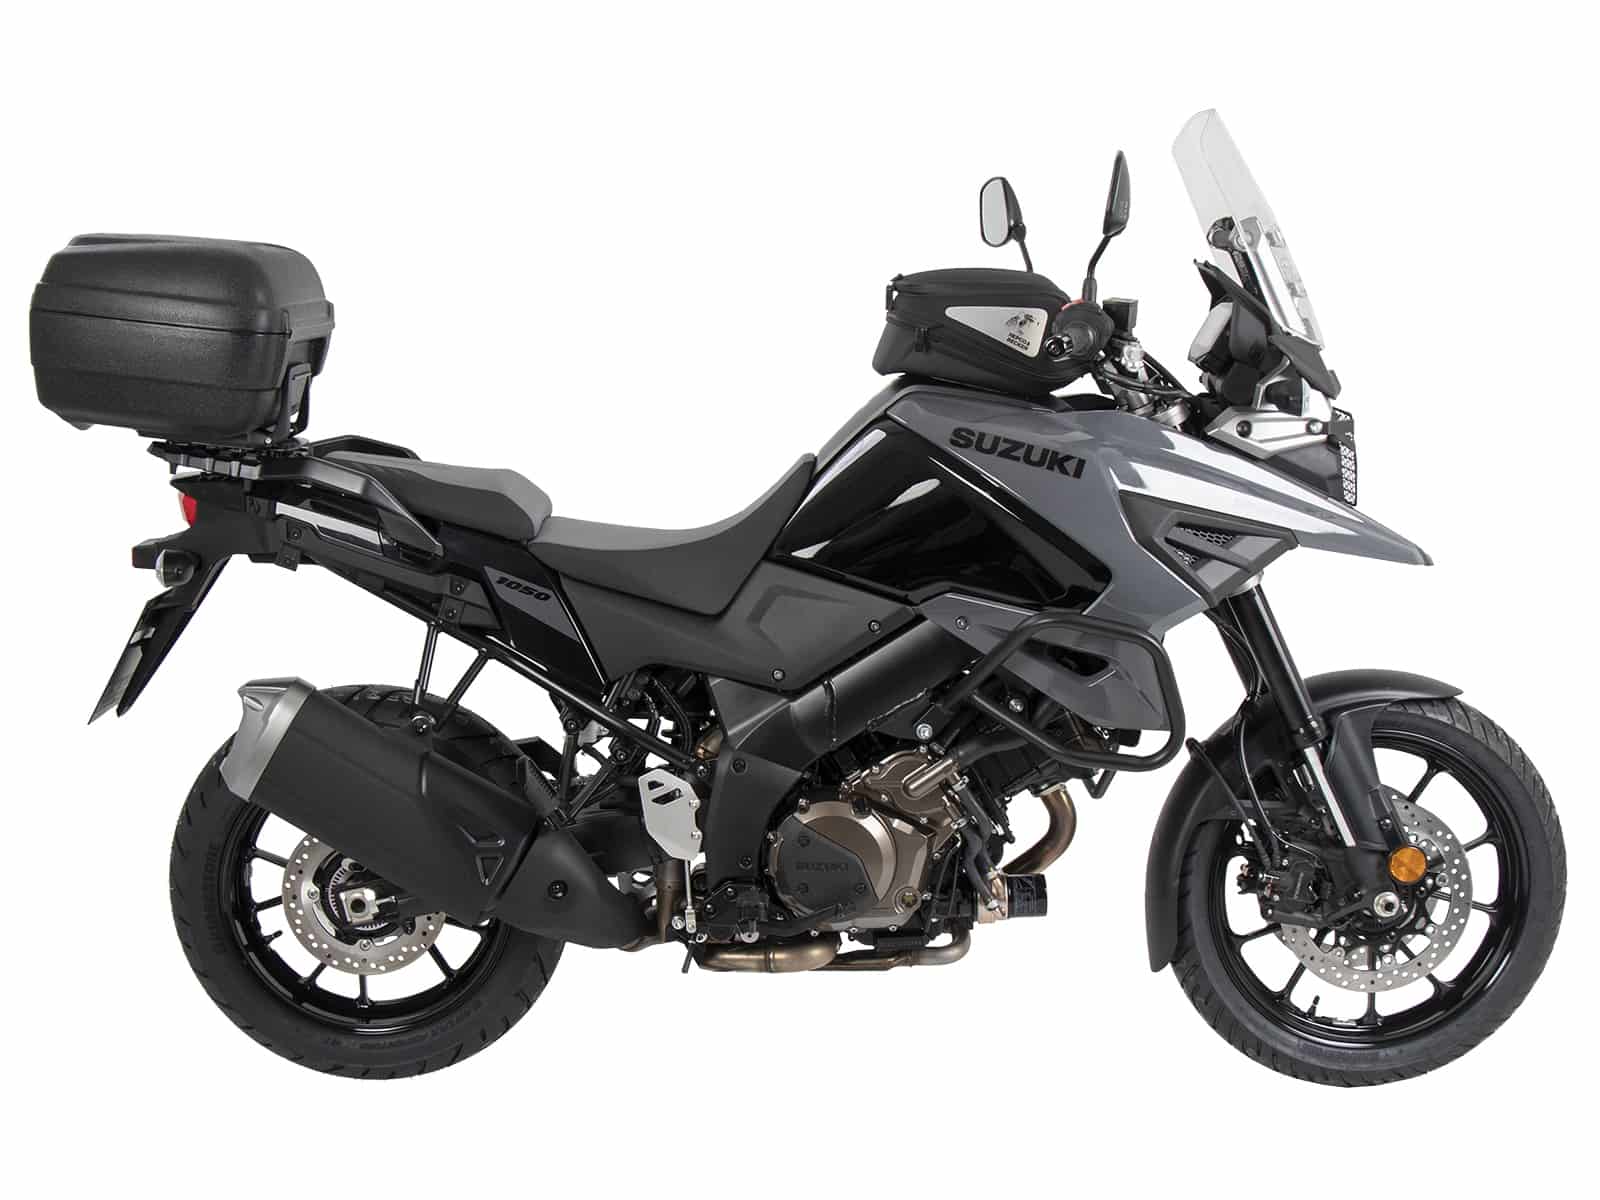 Alurack top case carrier black for combination with original rear rack for Suzuki V-Strom 1050 / XT (2020-2022)